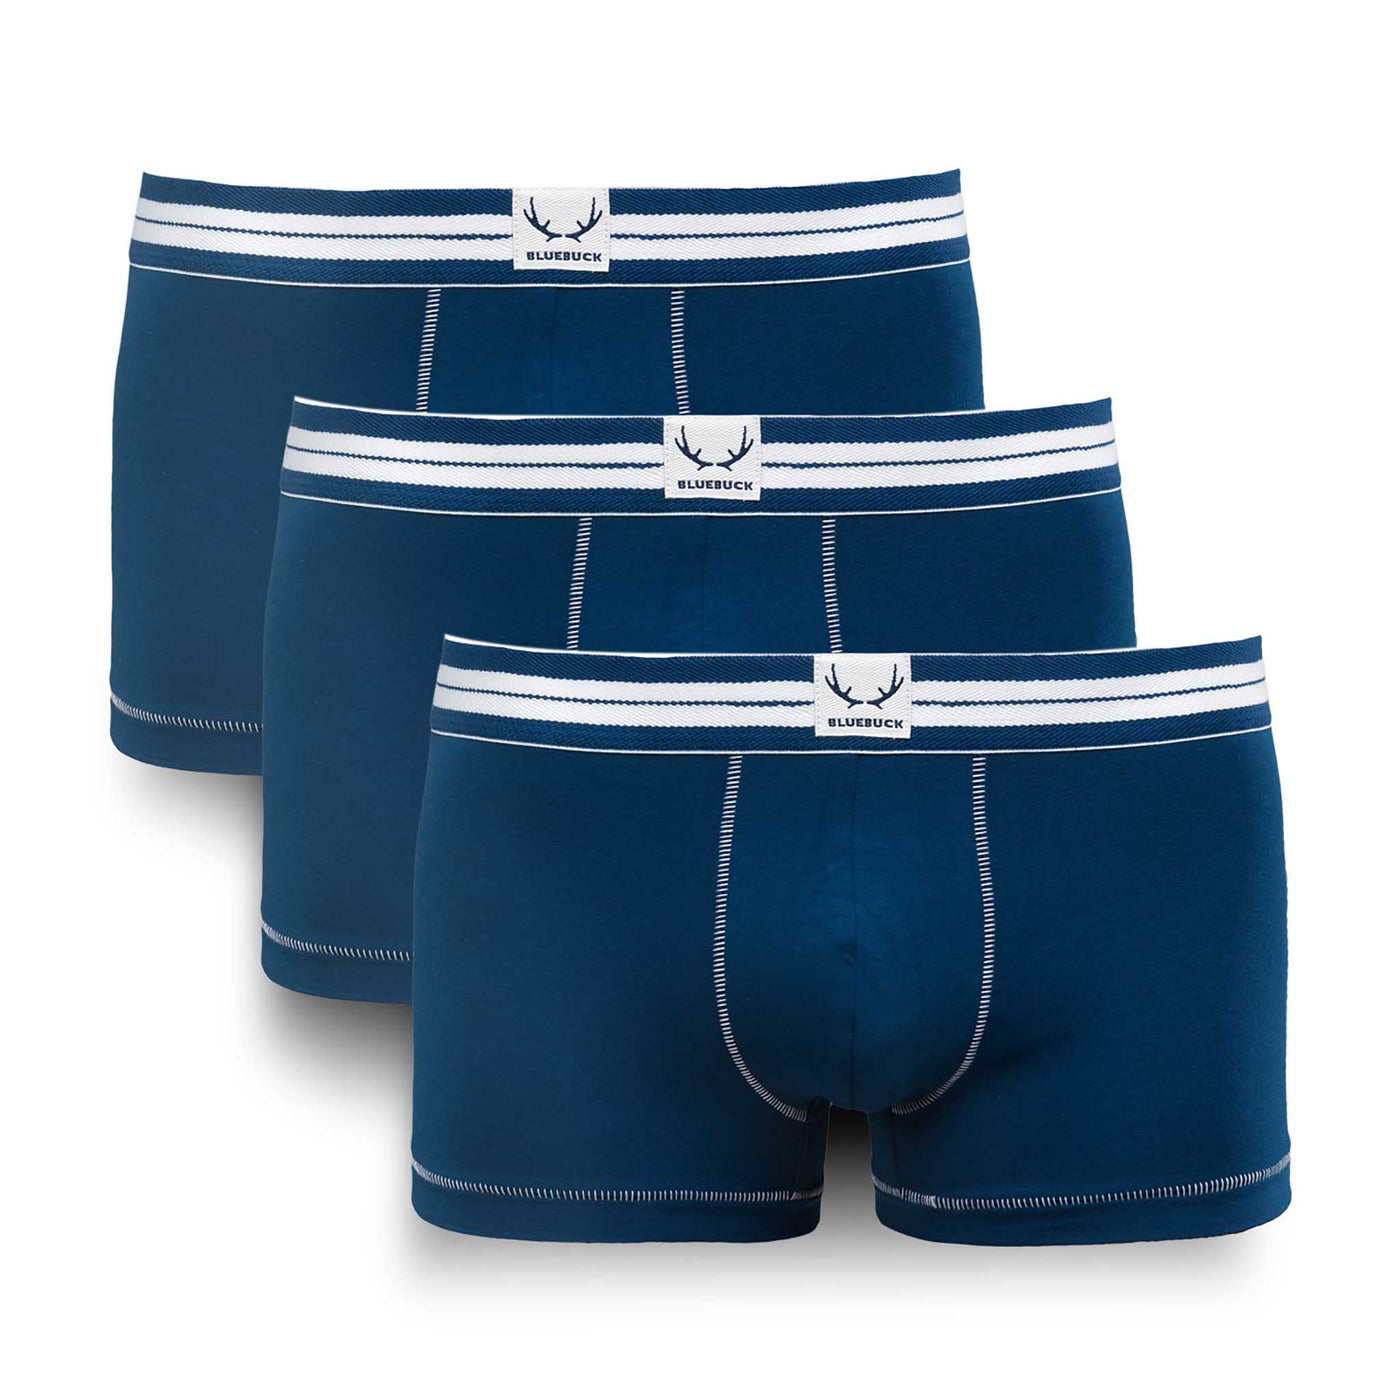 3 classic trunks for men in organic cotton